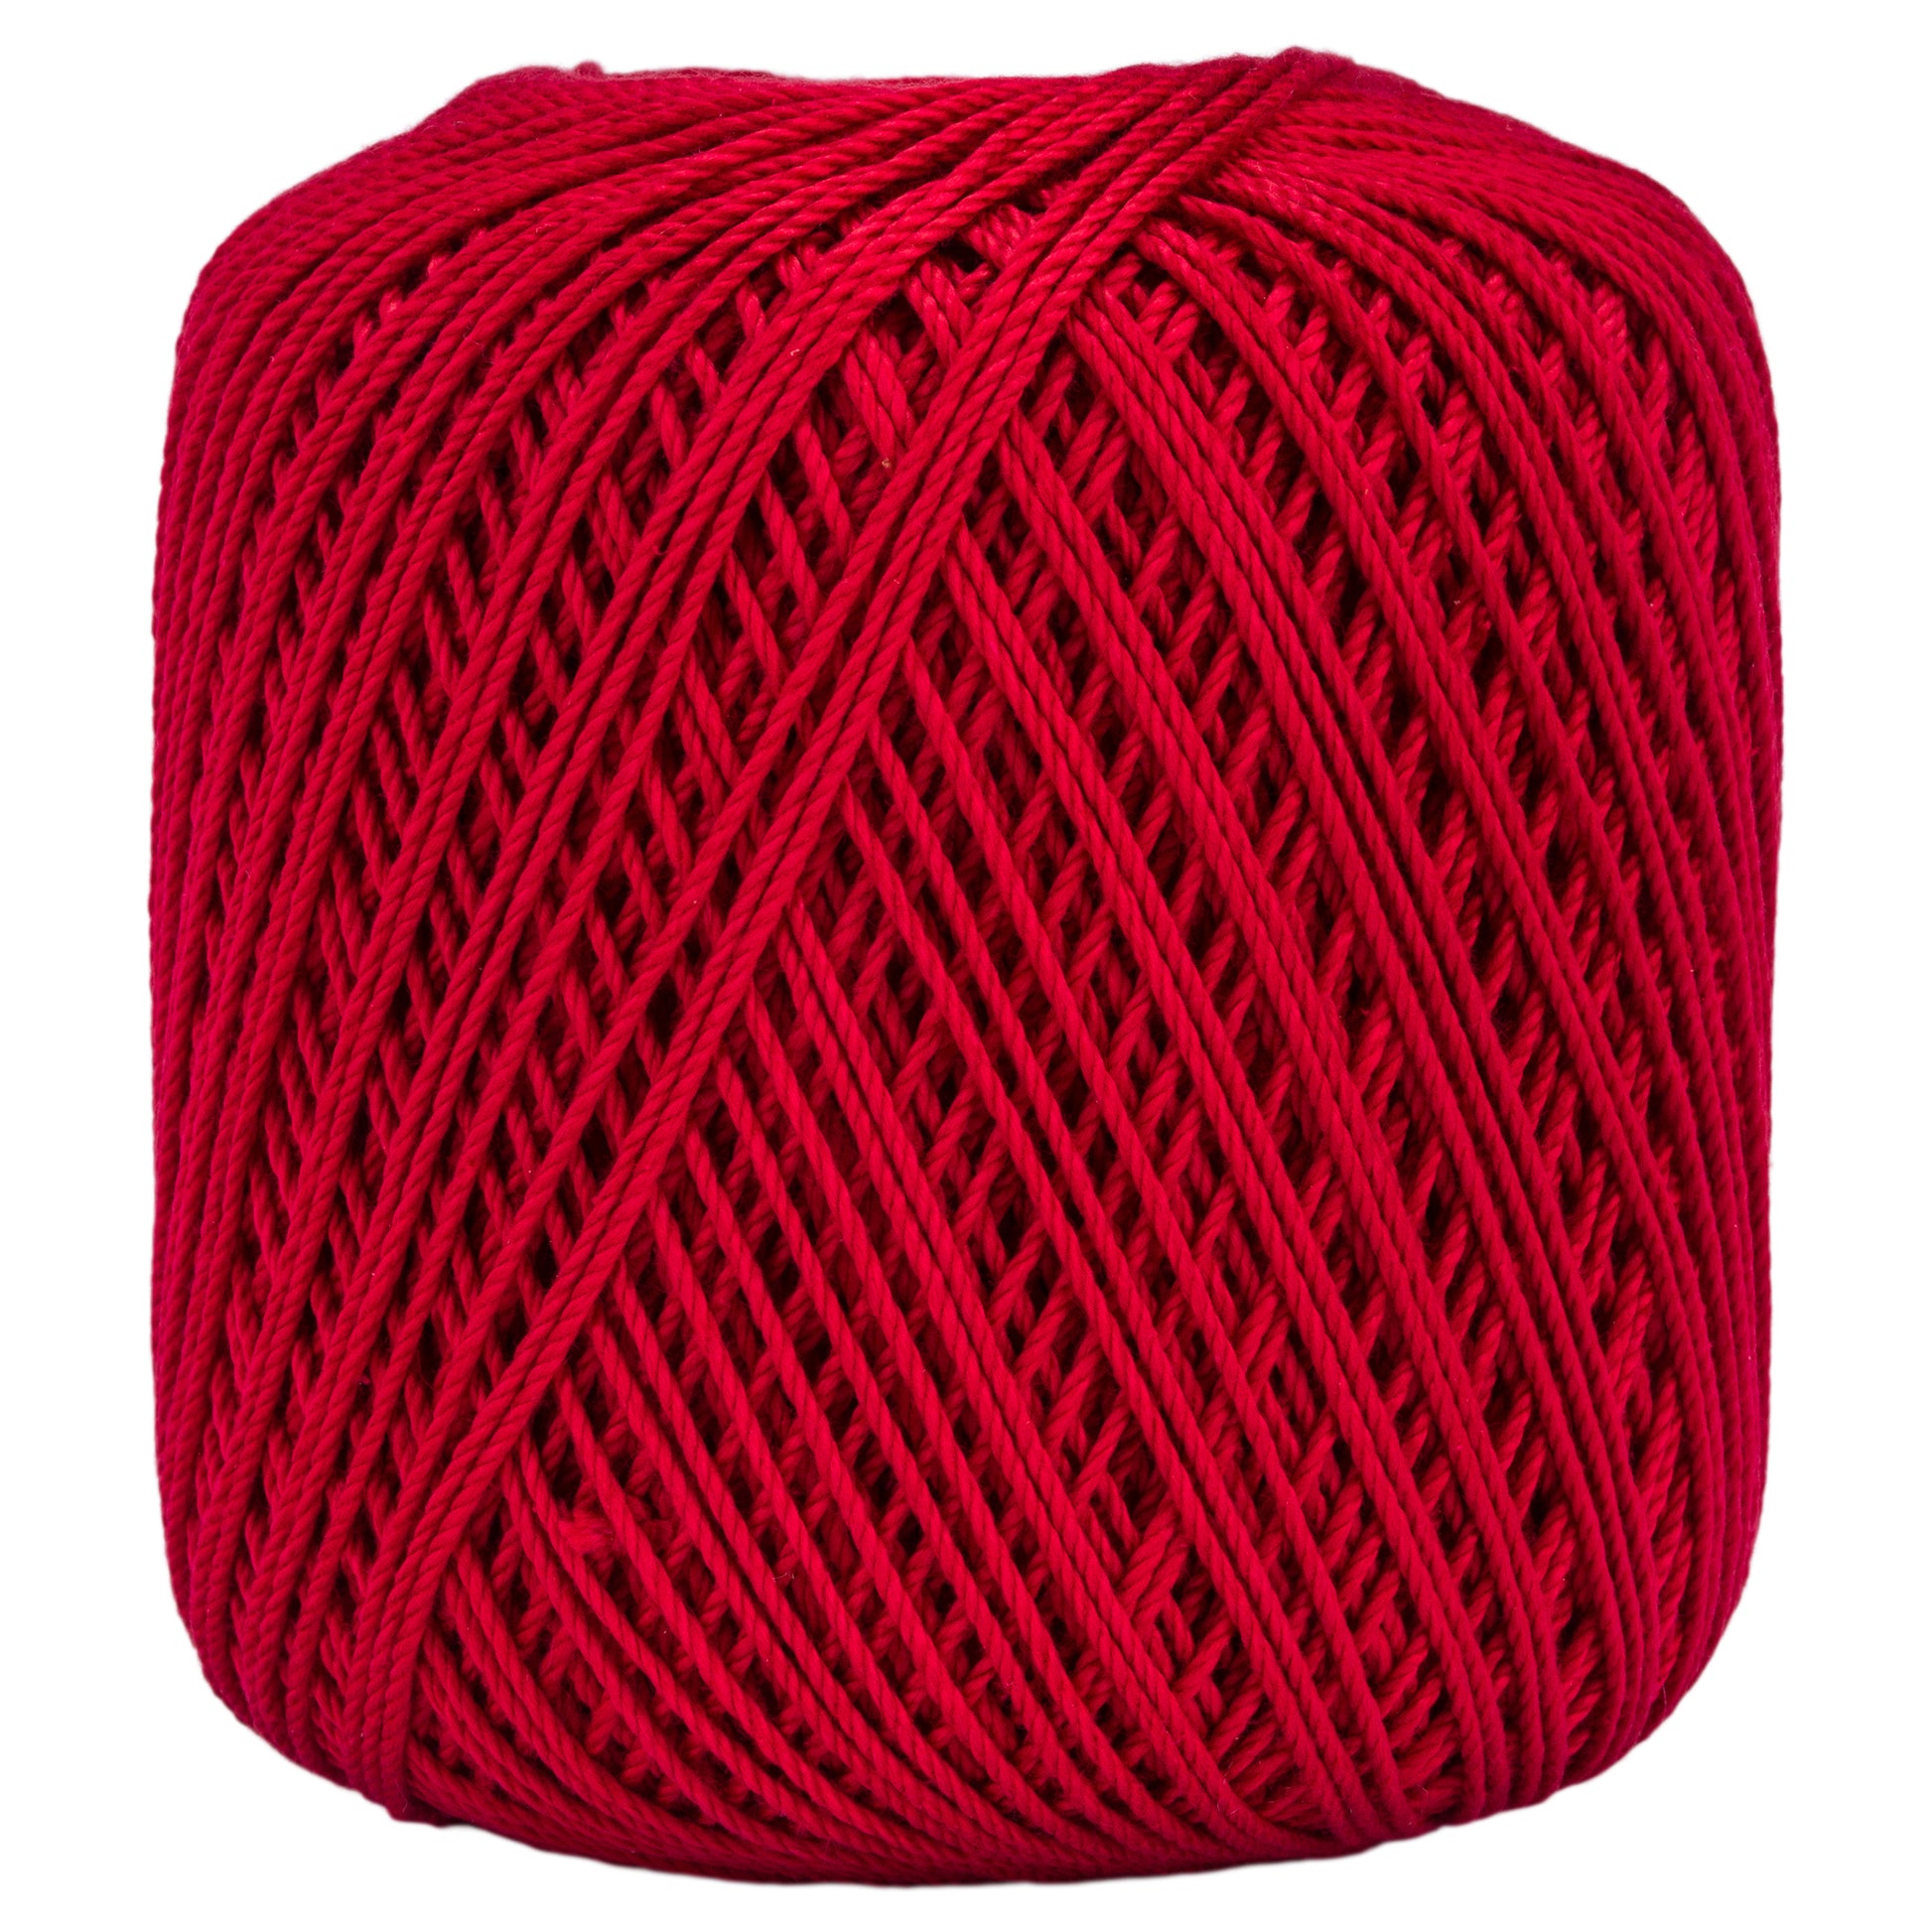 Aunt Lydia's Fashion Crochet Thread Size 3-Atom Red, 1 count